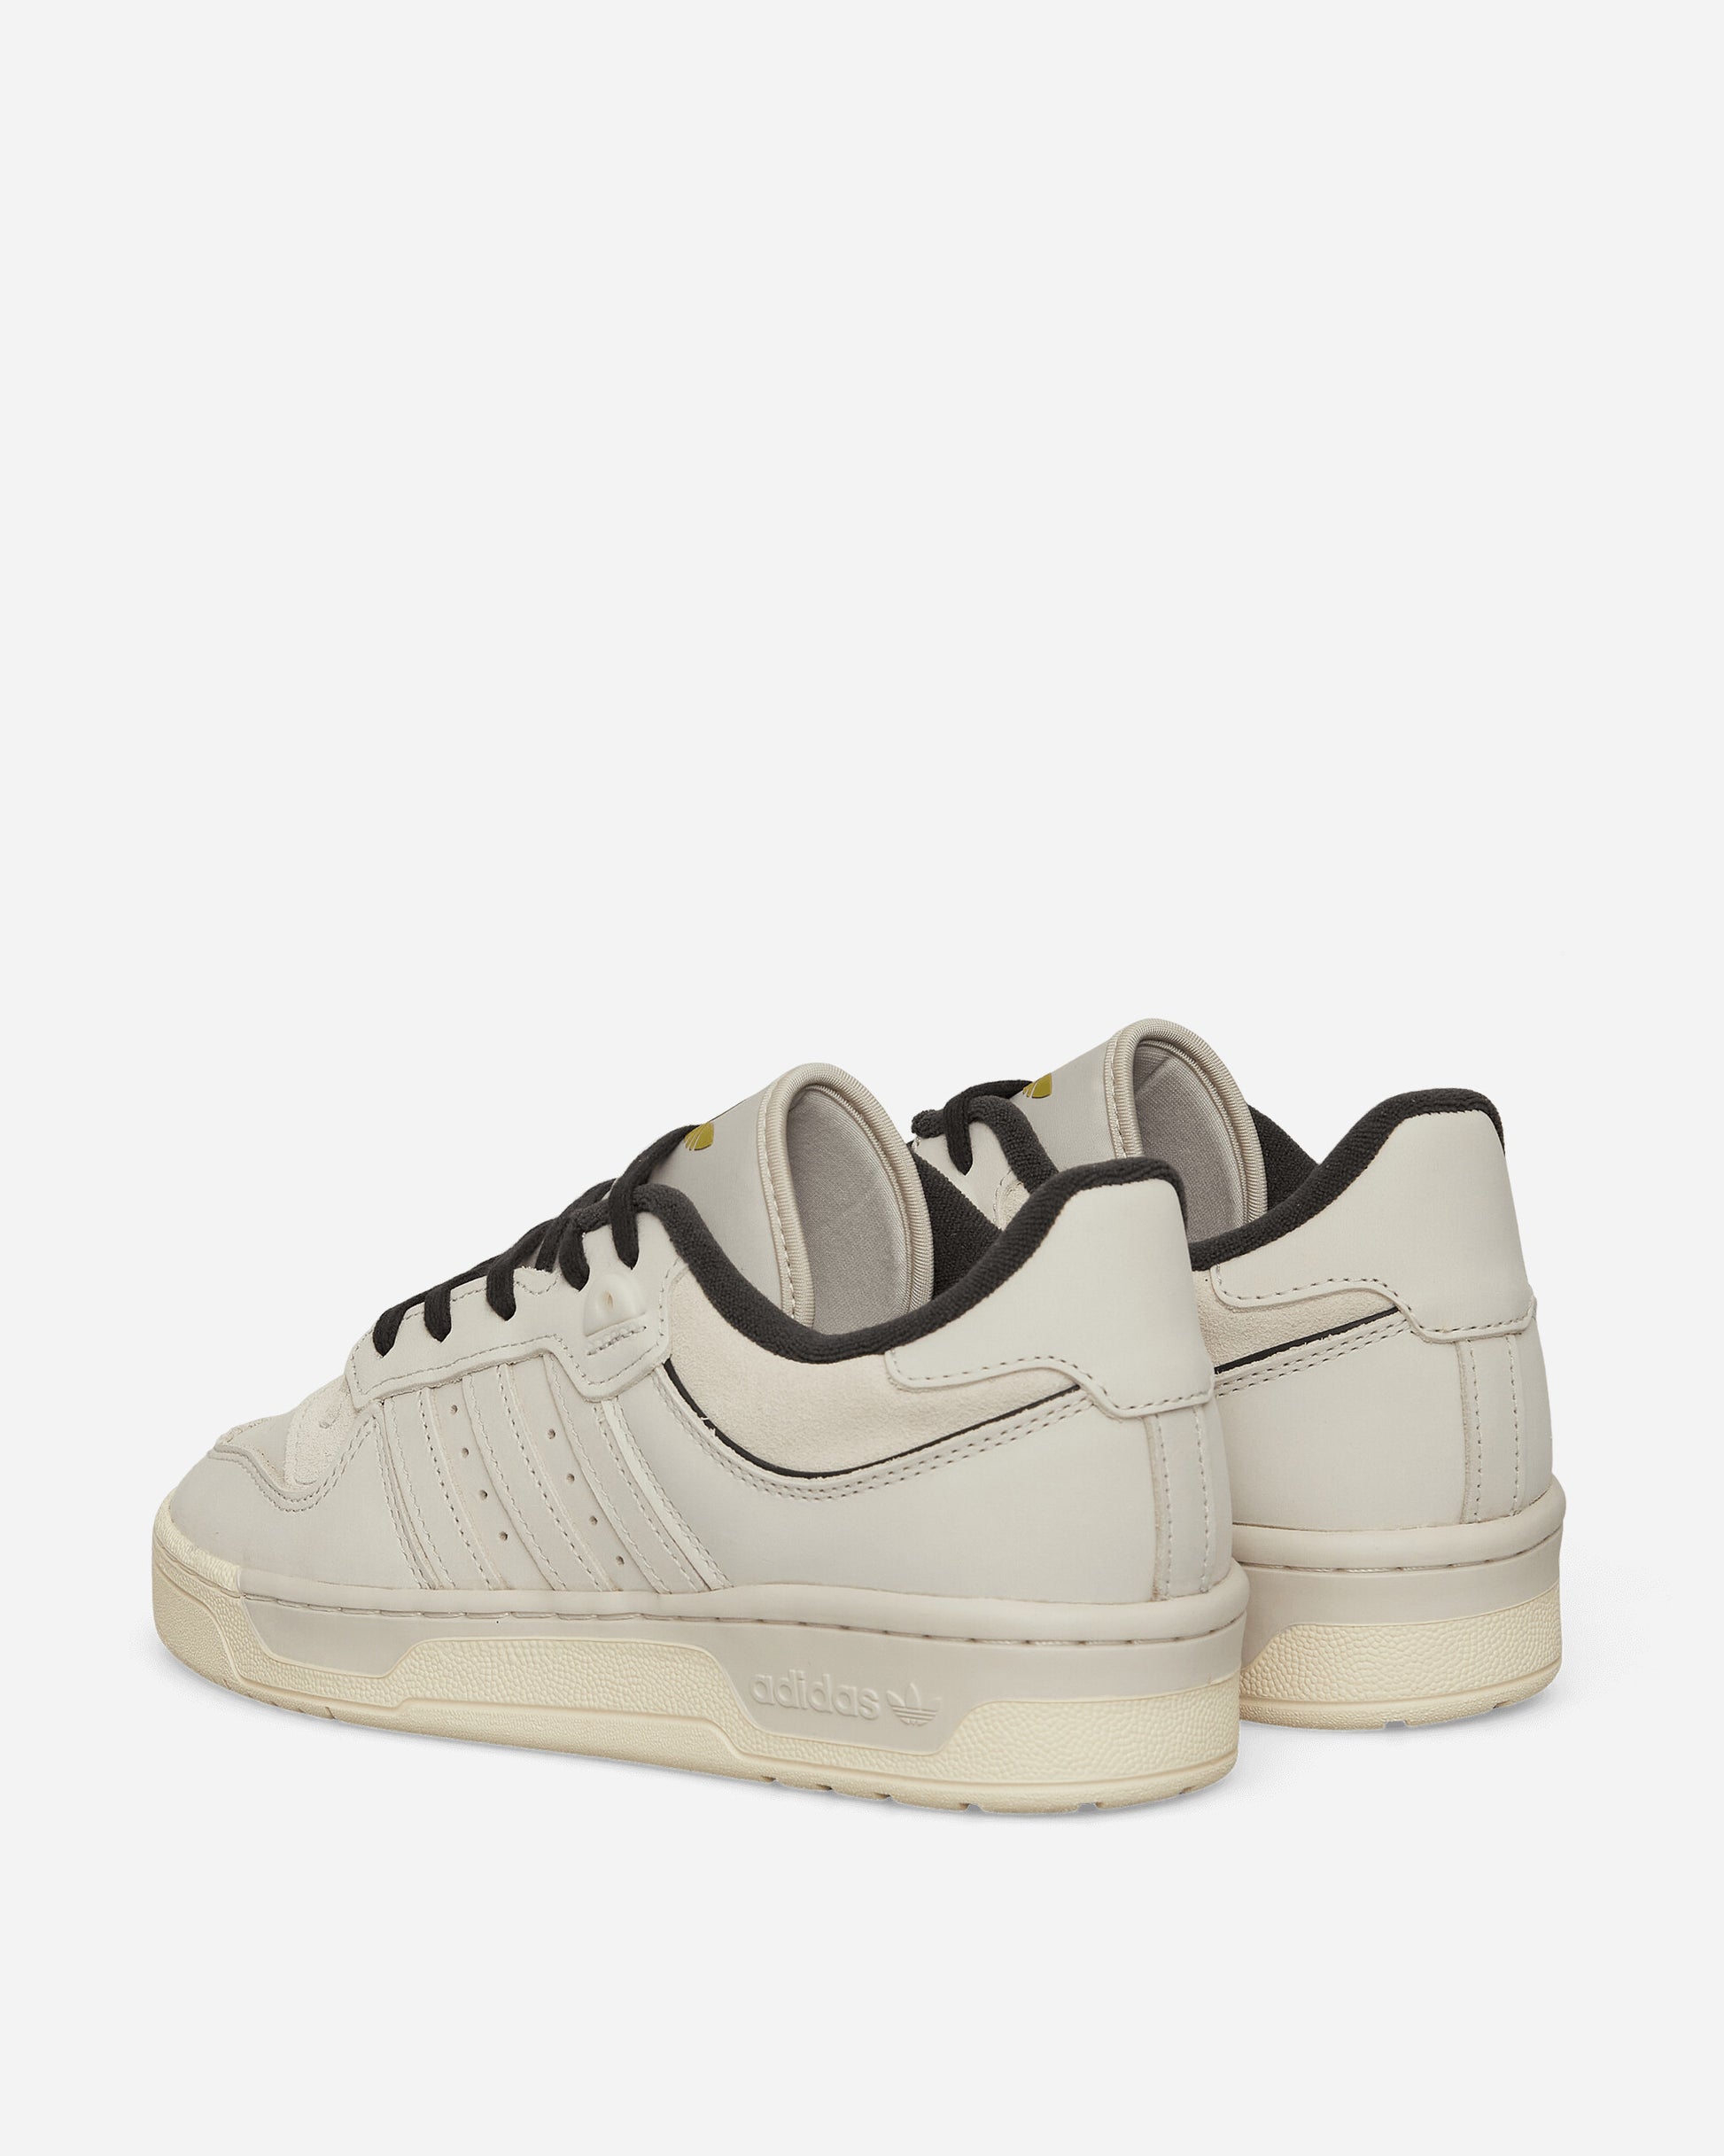 adidas Rivalry 86 Low 003 Talc/Carbon Sneakers Low IF3402 001